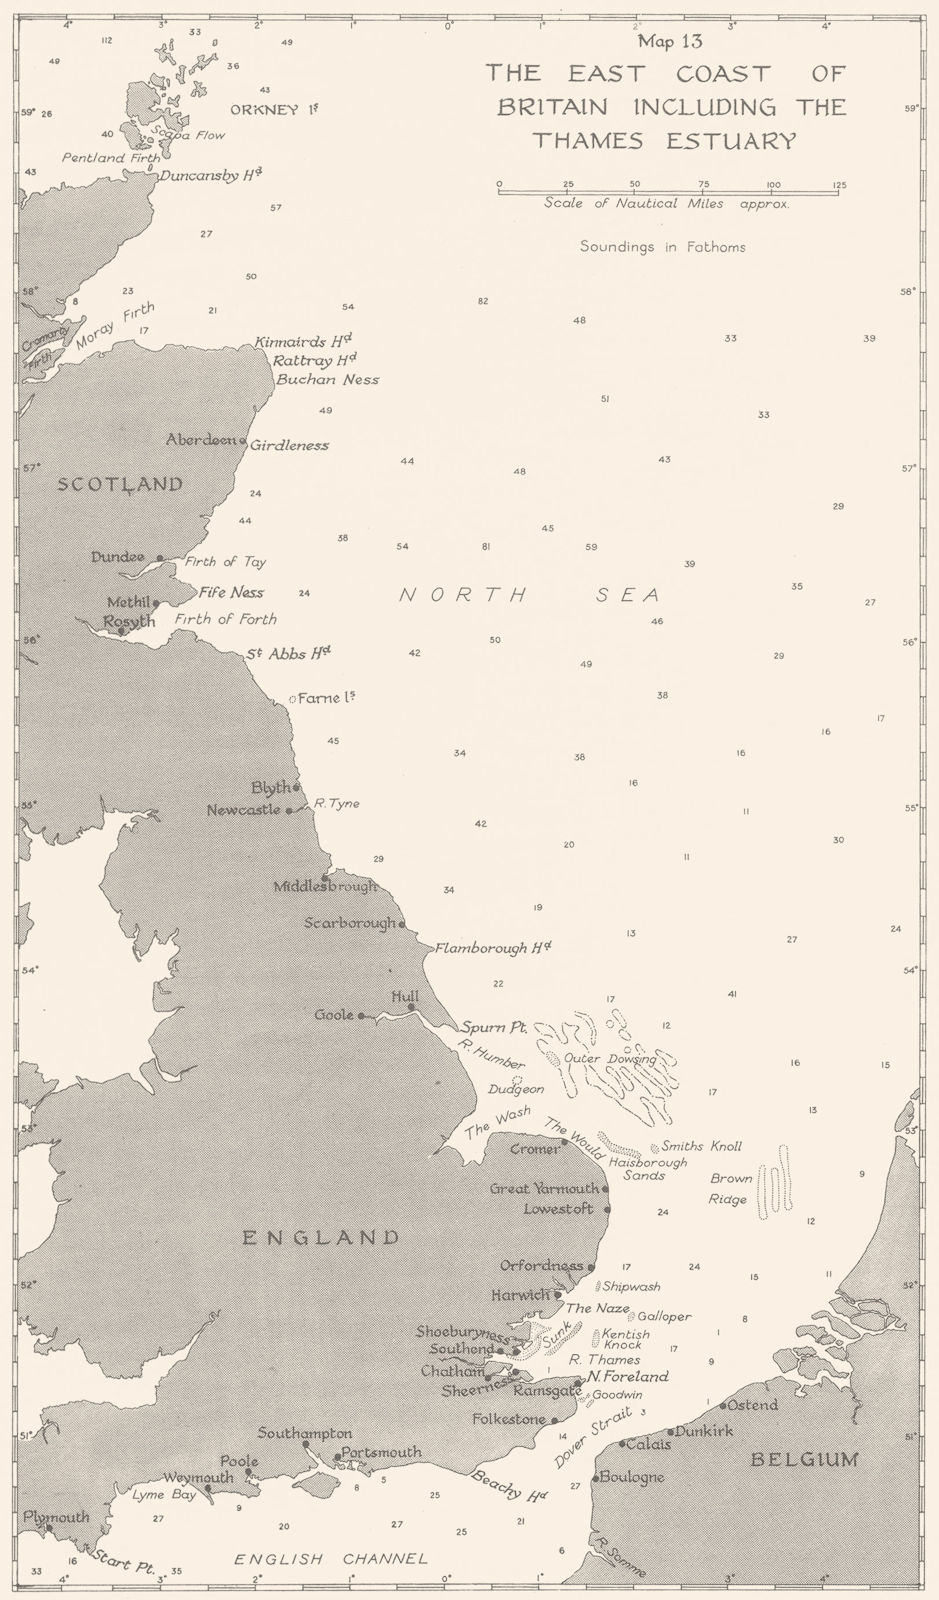 UK. Jan-May 1940. east Coast of Britain, including Thames Estuary 1954 old map